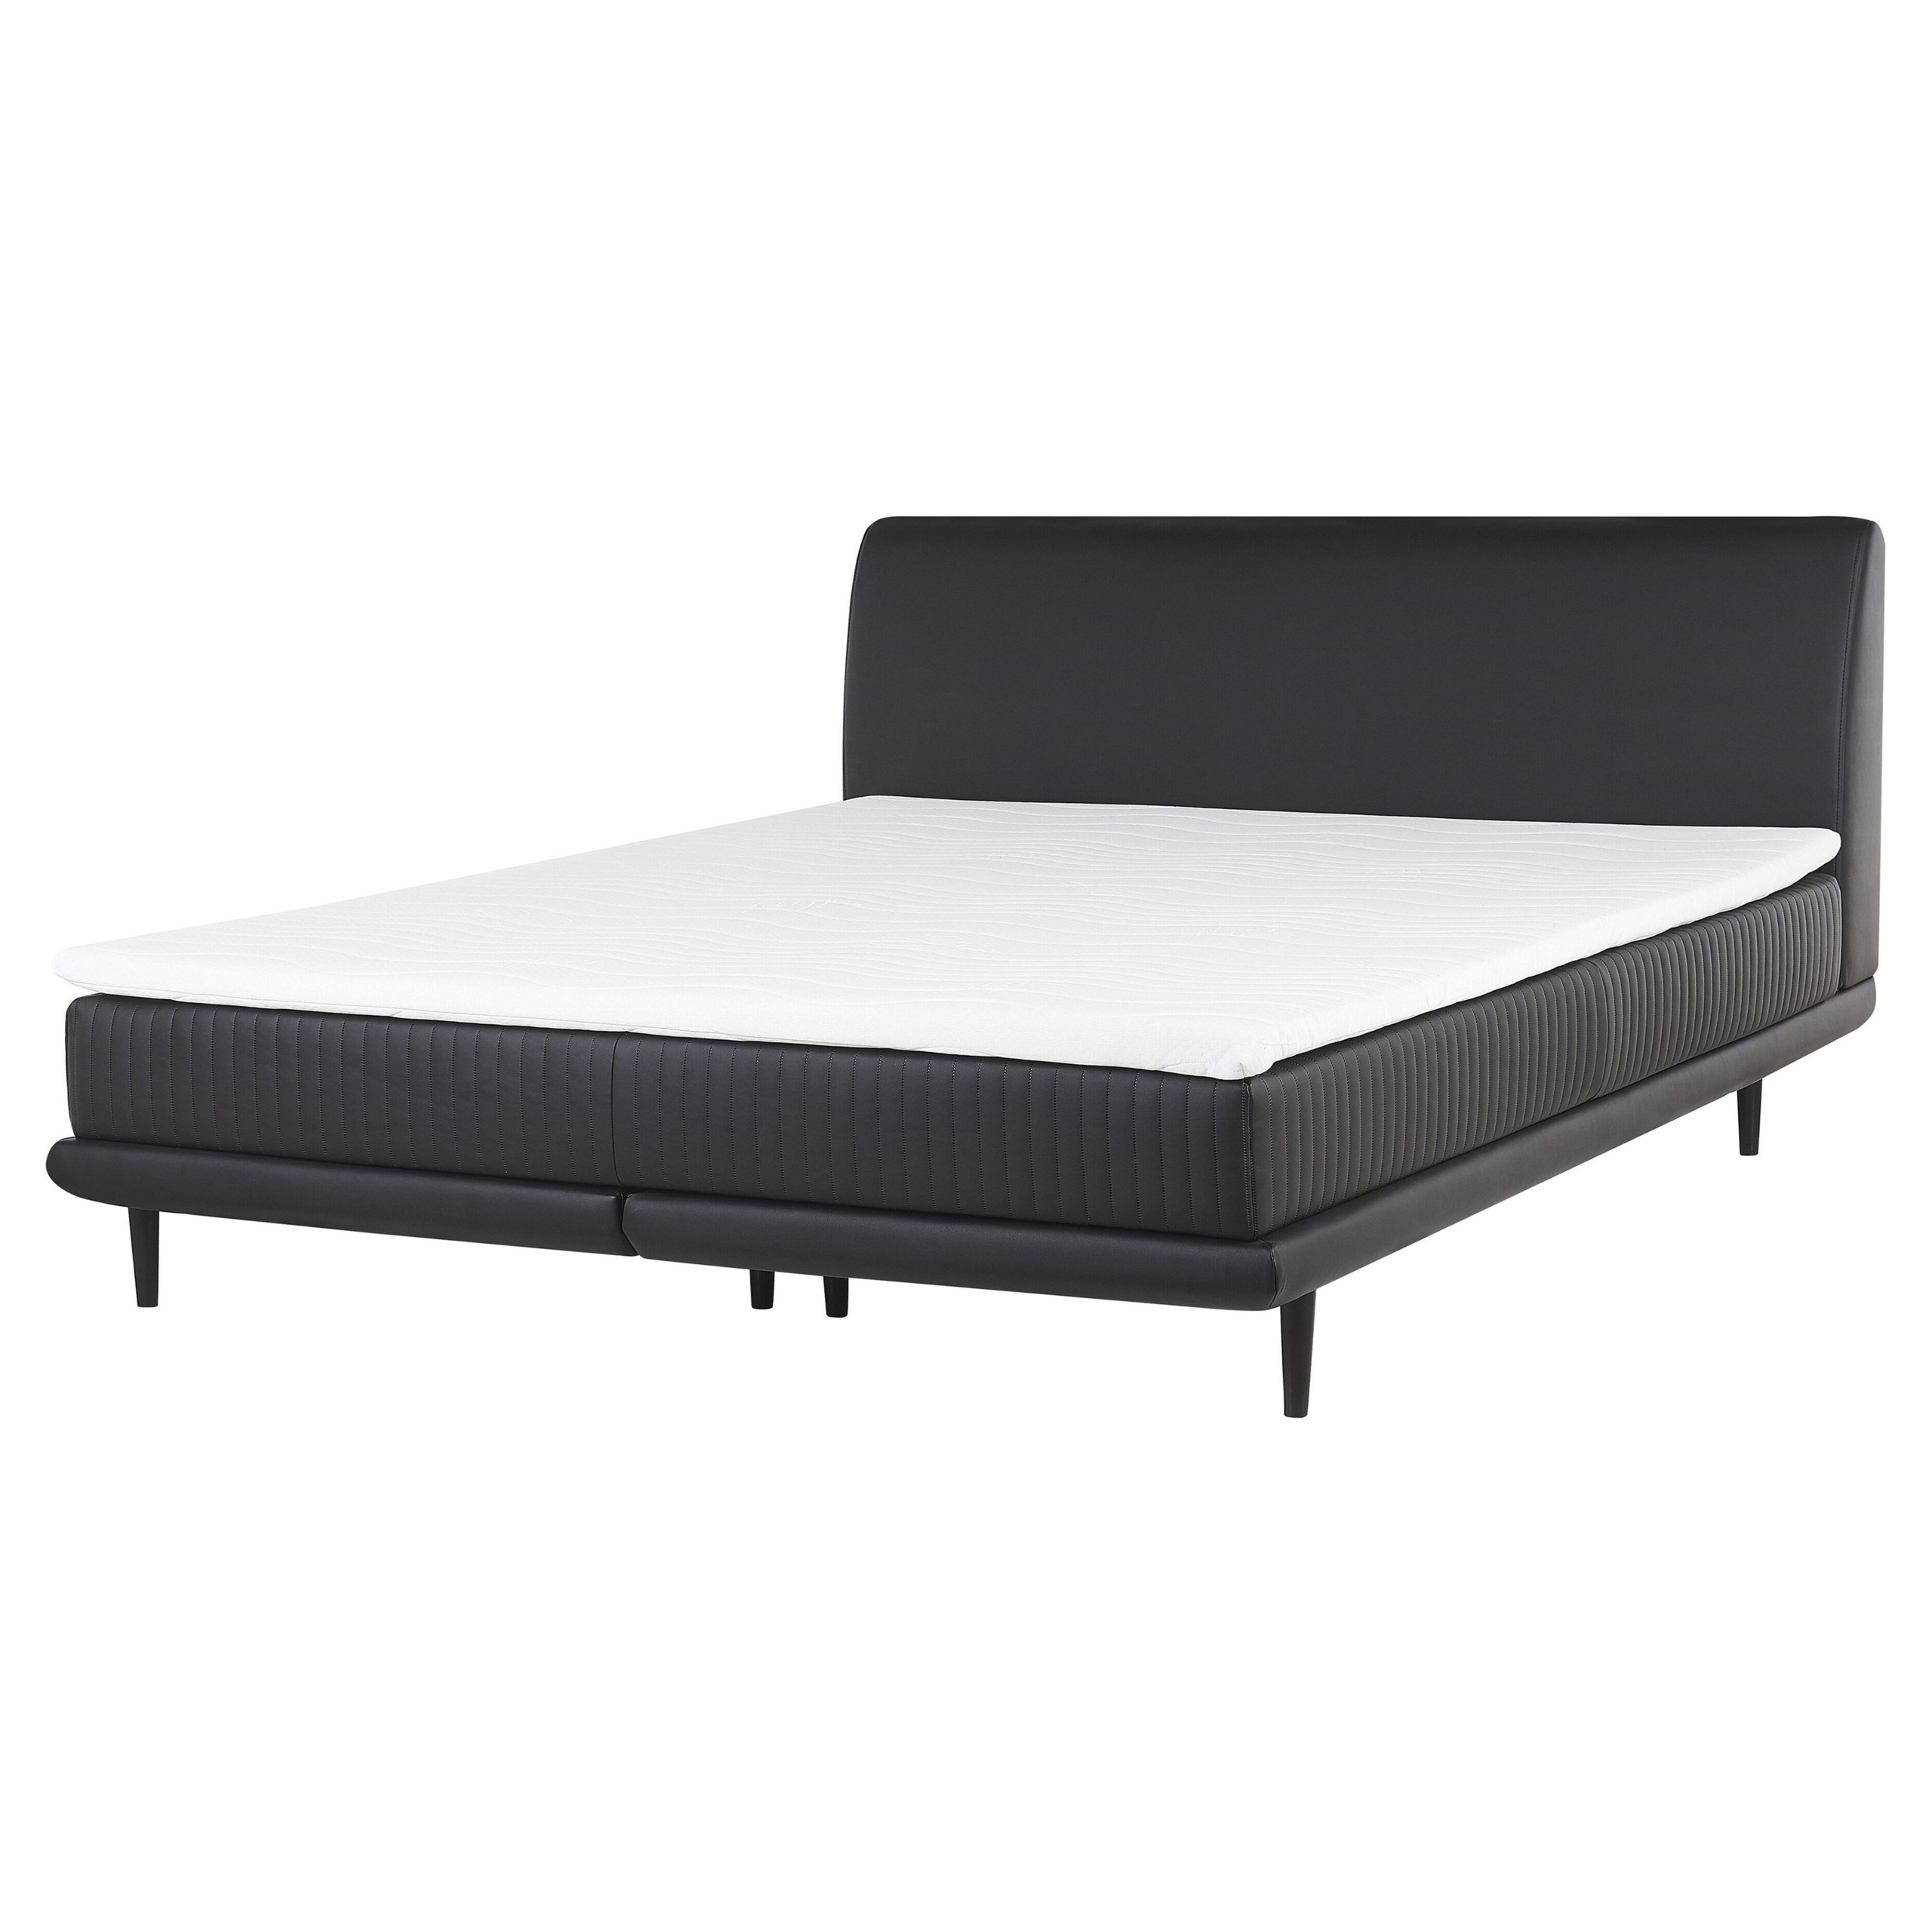 Beliani EU King Size Continental Divan Bed 5ft3 Black Faux Leather with Zigzag Spring Mattress and Topper